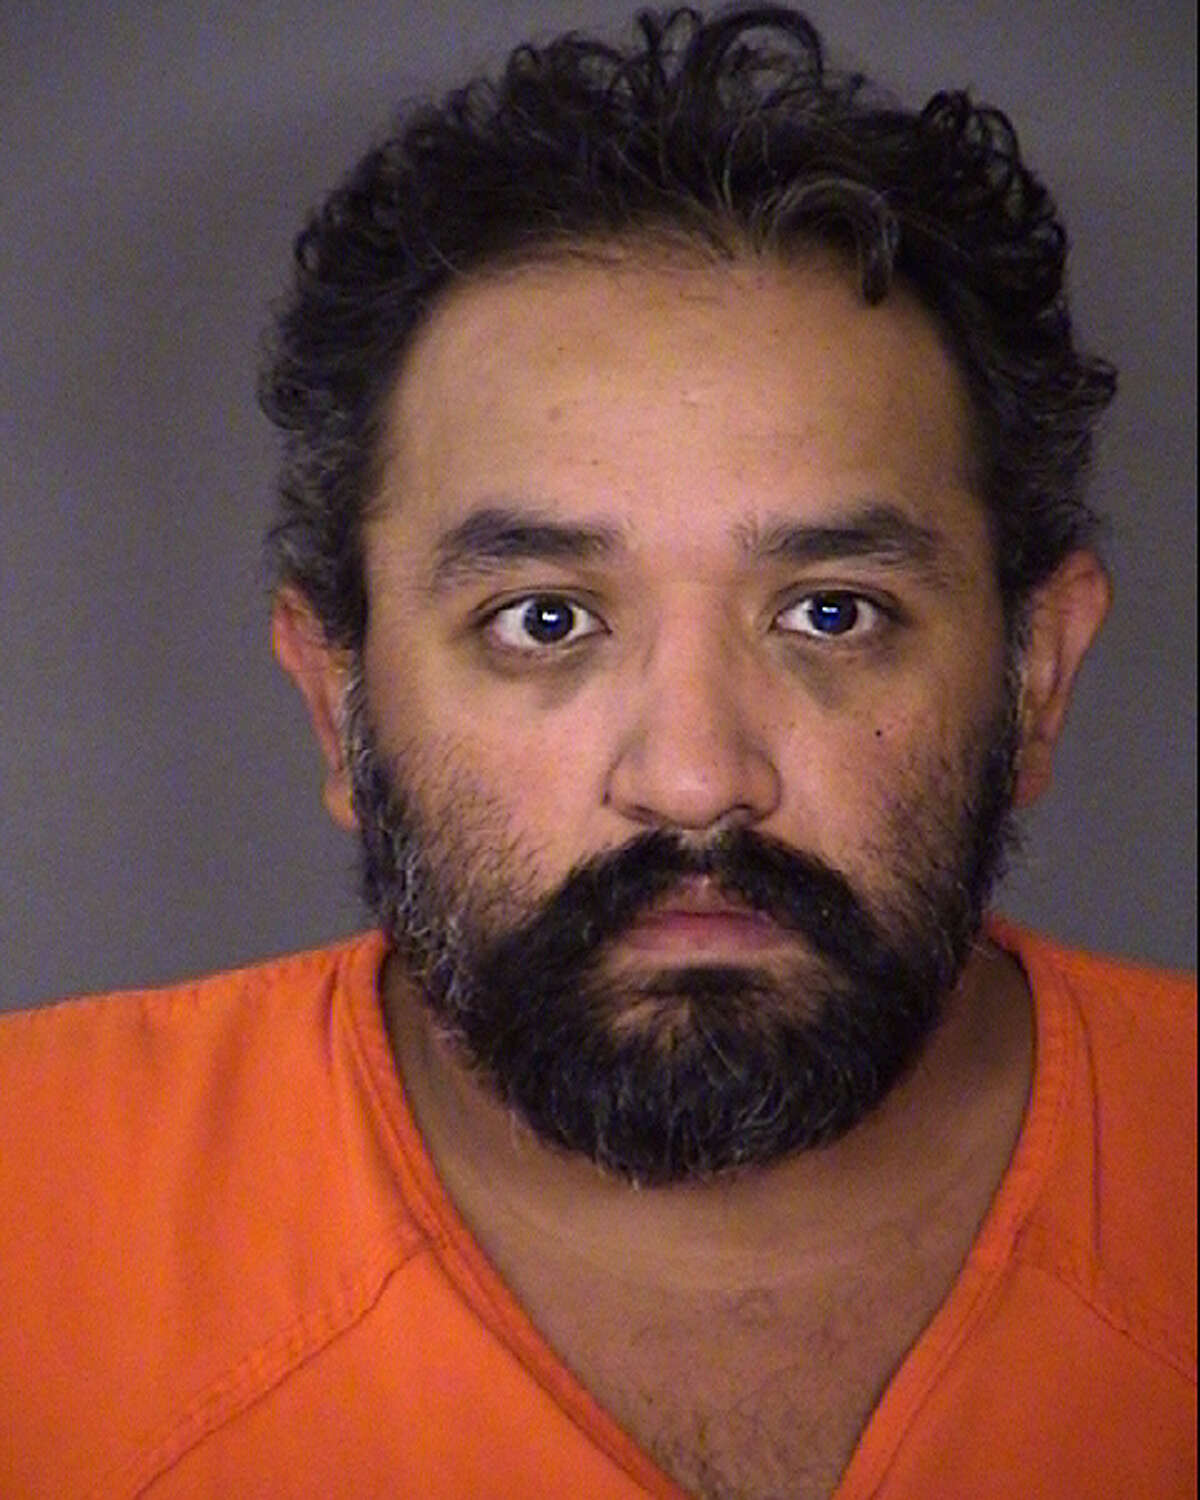 Court records have revealed that Gonzales was one of three victims of Erick Montez, a disgraced sheriff's deputy who worked in the detention division and was first arrested on sexual assault charges in January 2016.